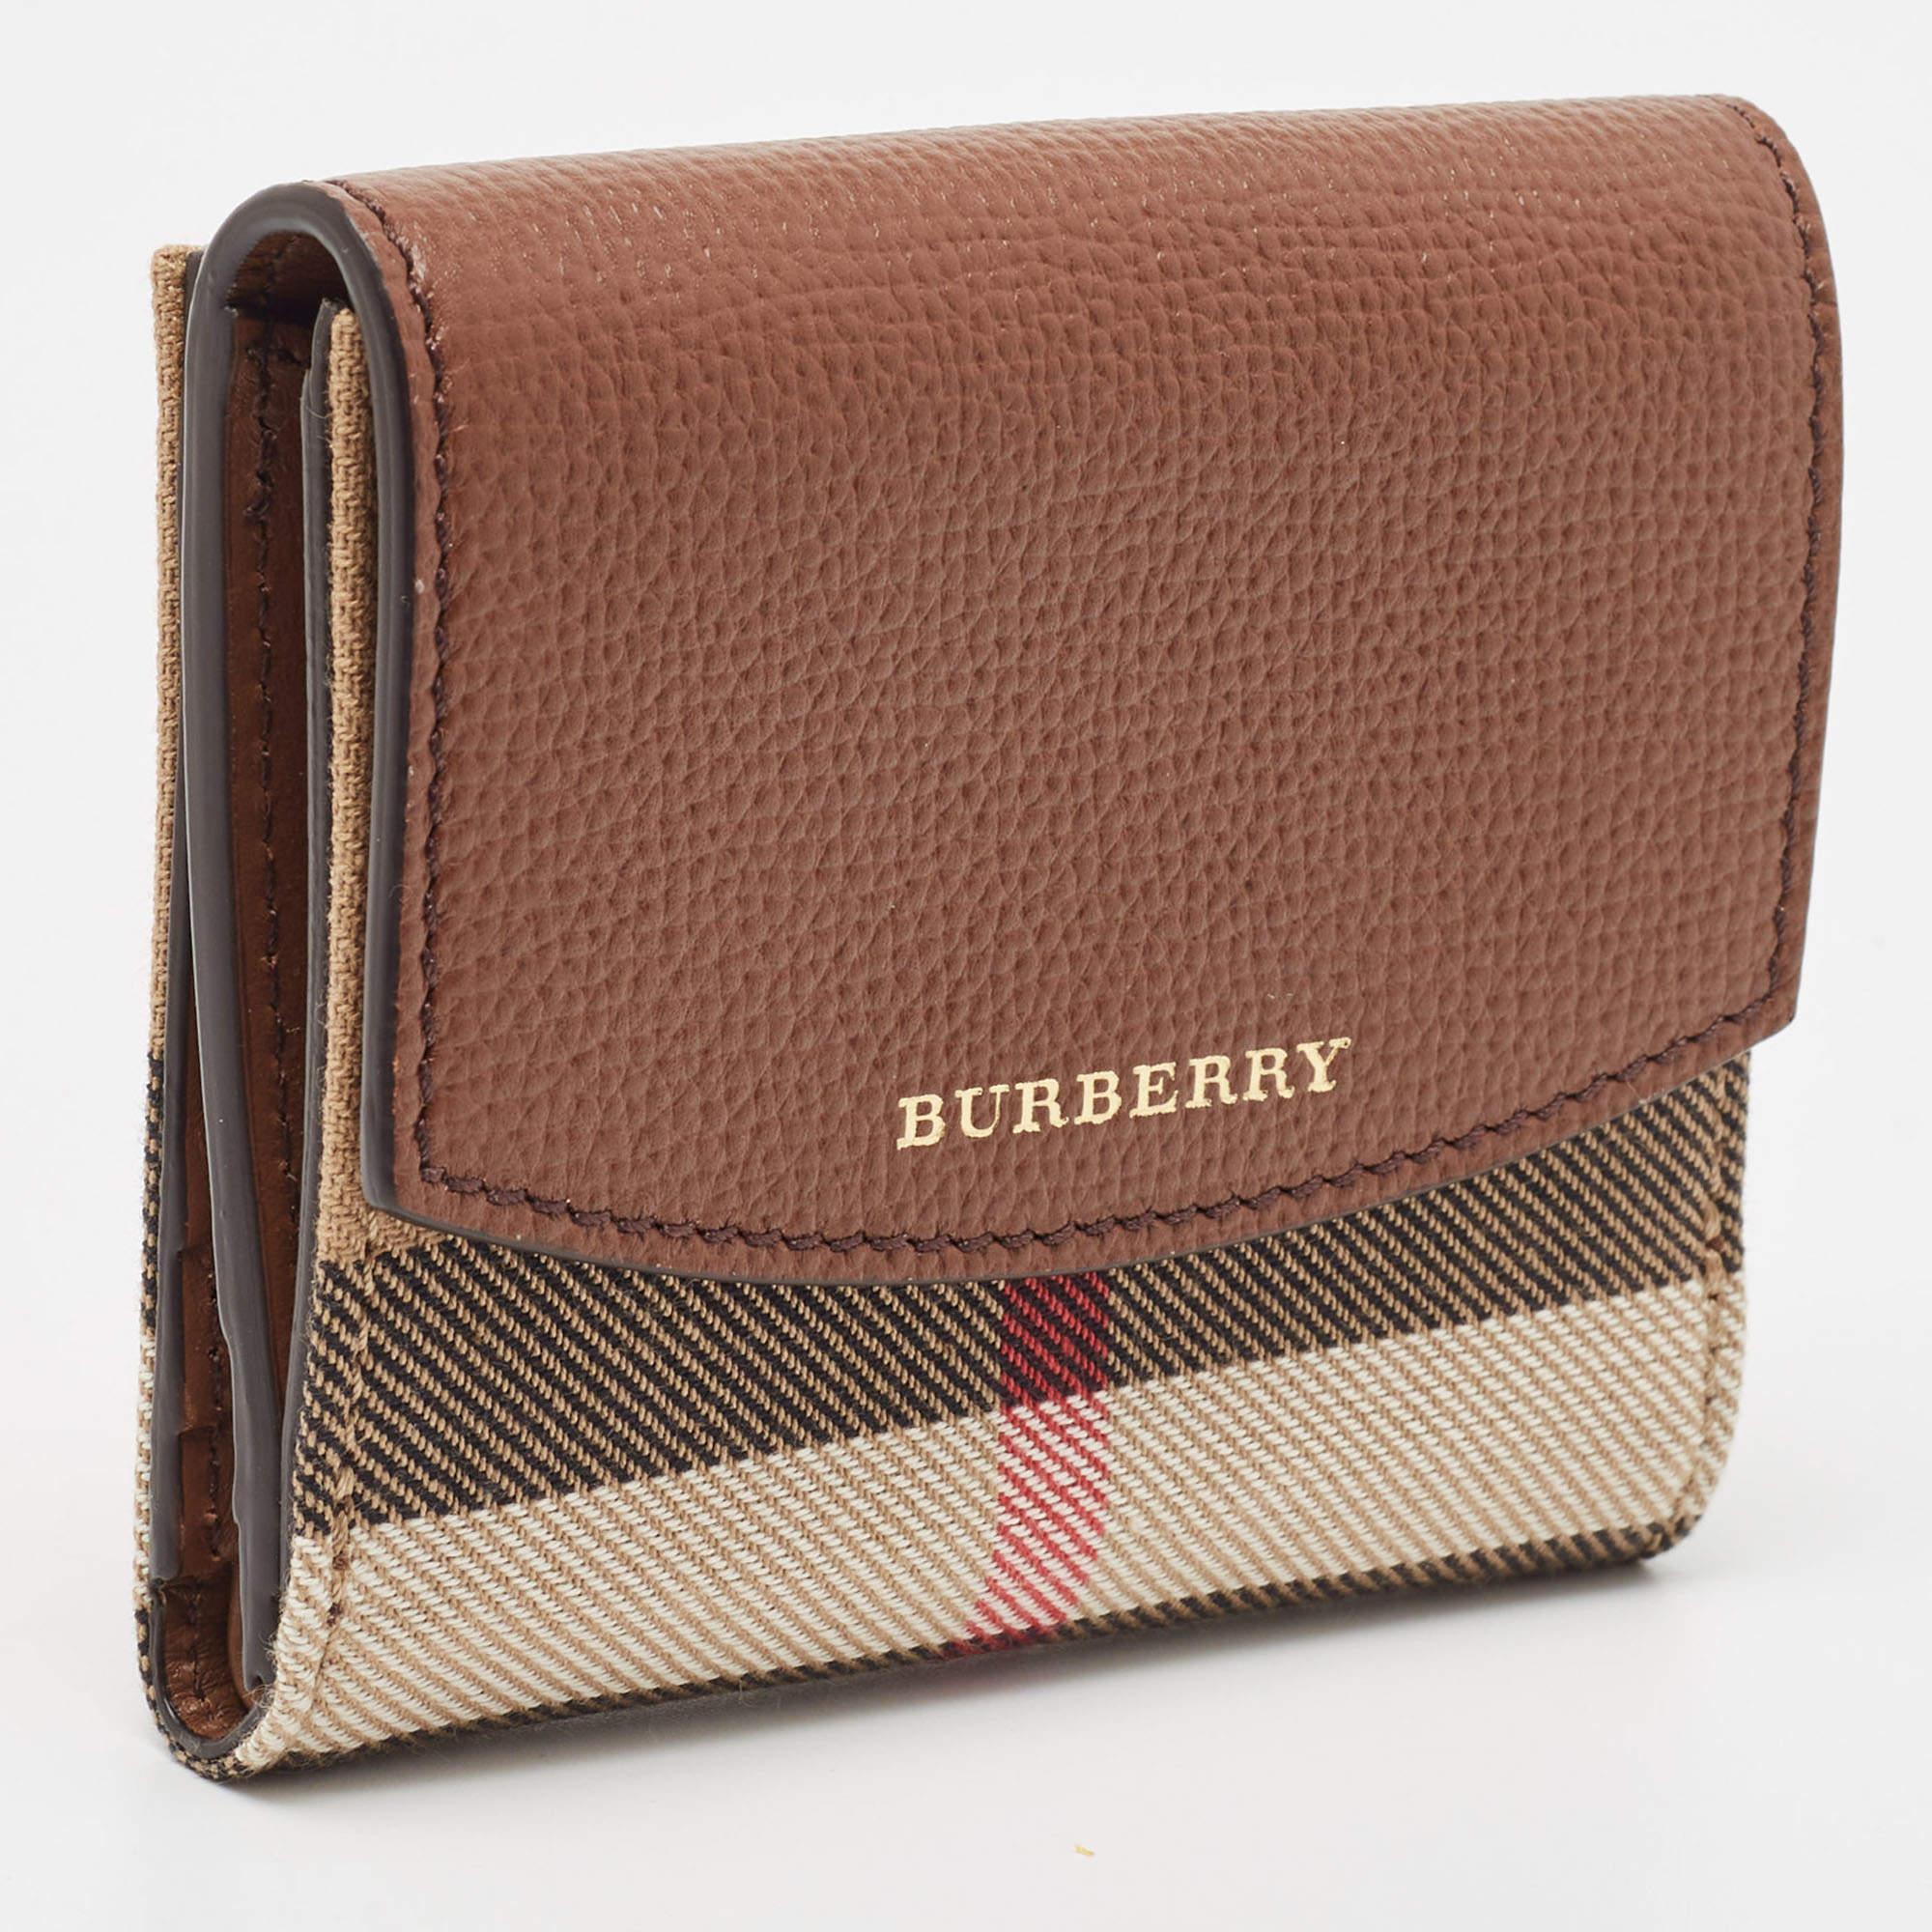 Keep your monetary valuables organized with the compartmentalized interior of this Burberry wallet. Made from leather and House Check fabric, the brand detailing on the front flap leads to an instant luxury notification.

